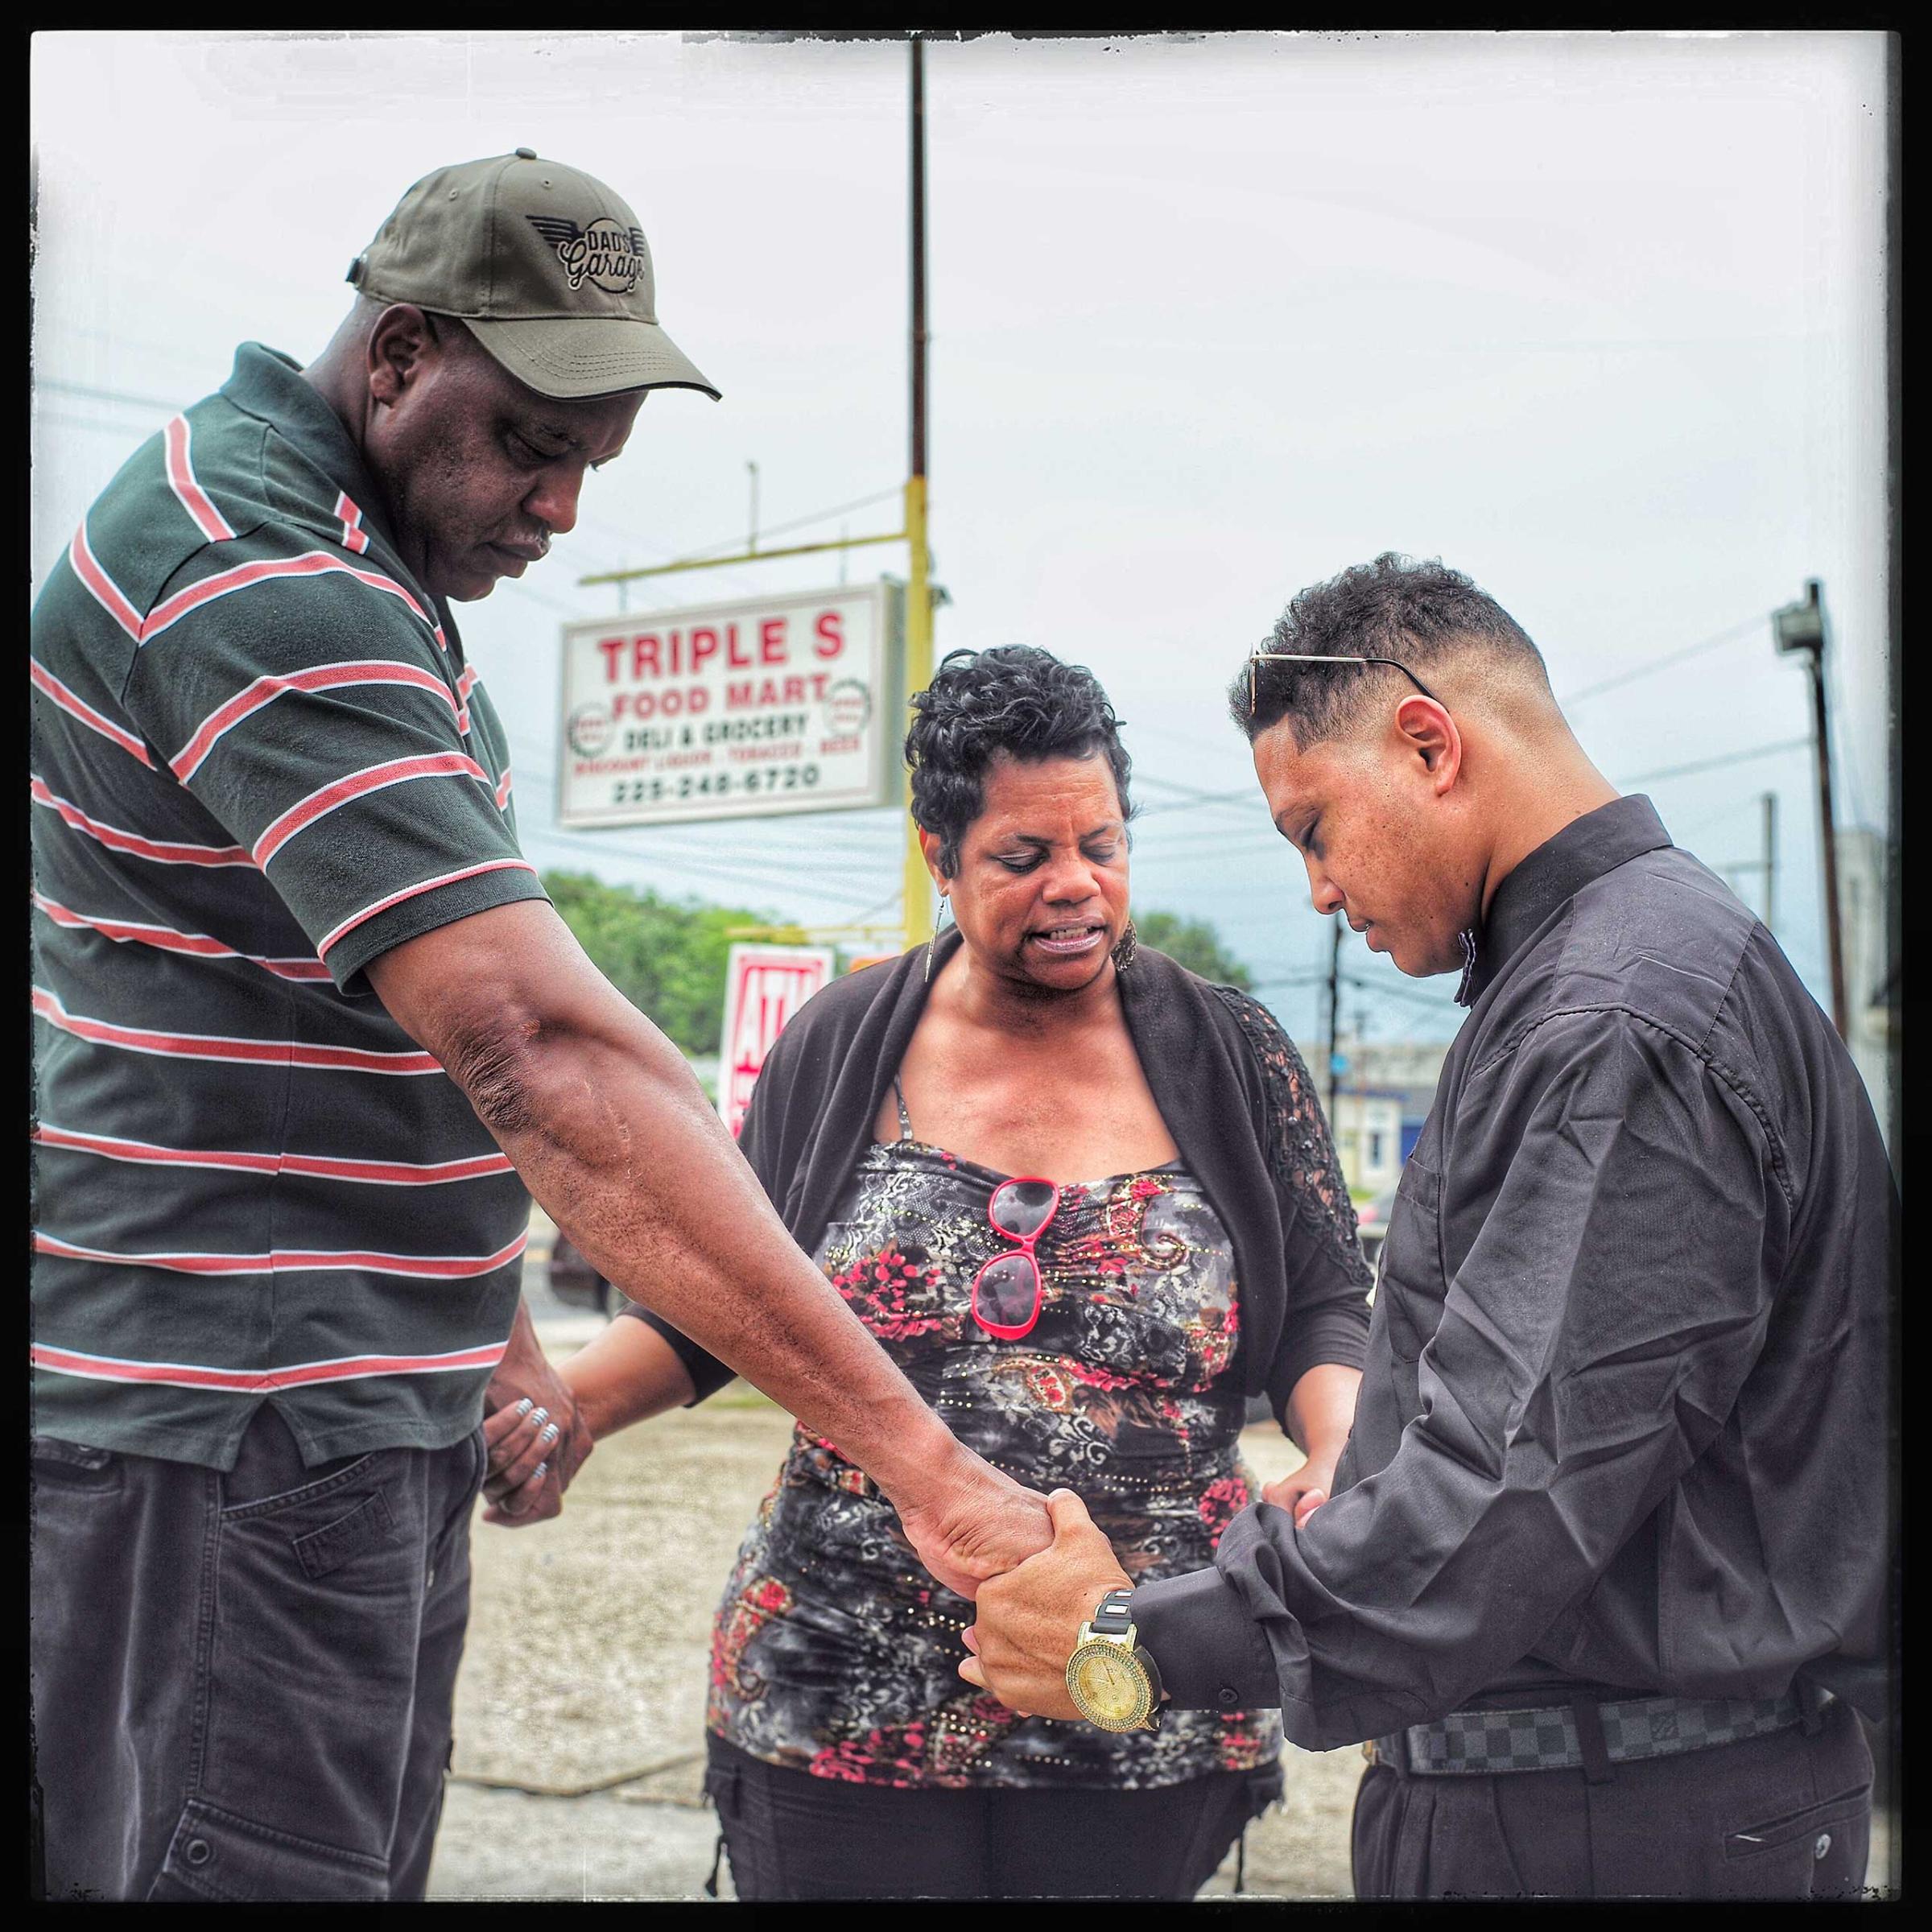 Praying for a successful meeting with 24 year old javier Dunn (far left). Dunn, who was arrested for protesting the Alton Sterling shooting by the Baton Rouge Police Department, was told he had to go see his parol officer as a condition of his release. Here, two community pastors pray with him before his meeting.